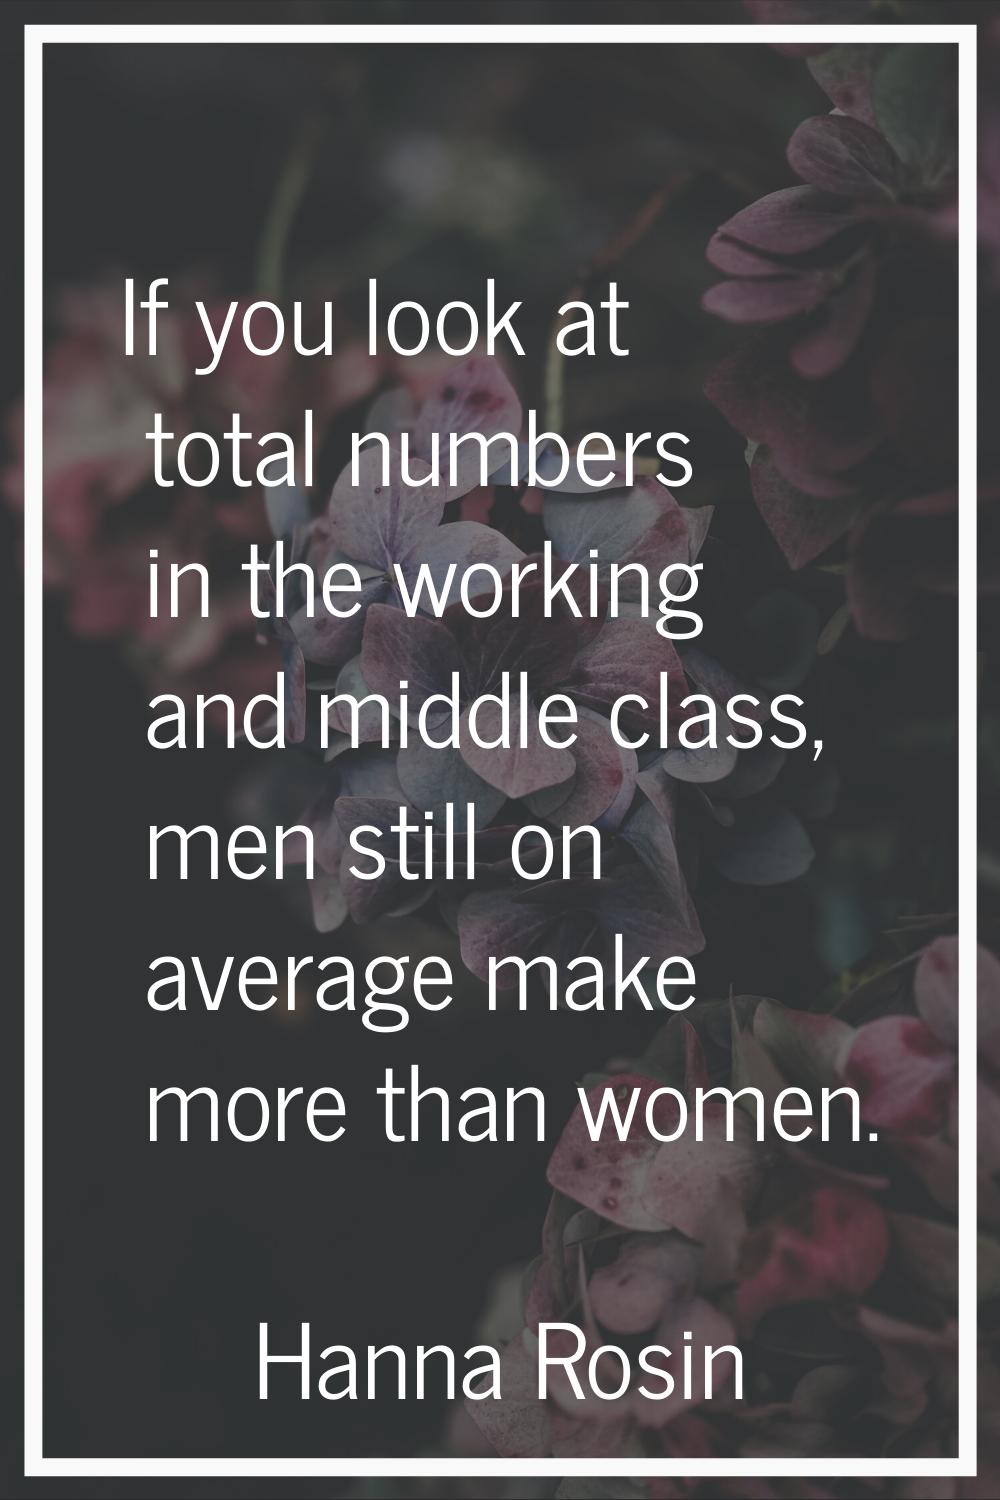 If you look at total numbers in the working and middle class, men still on average make more than w